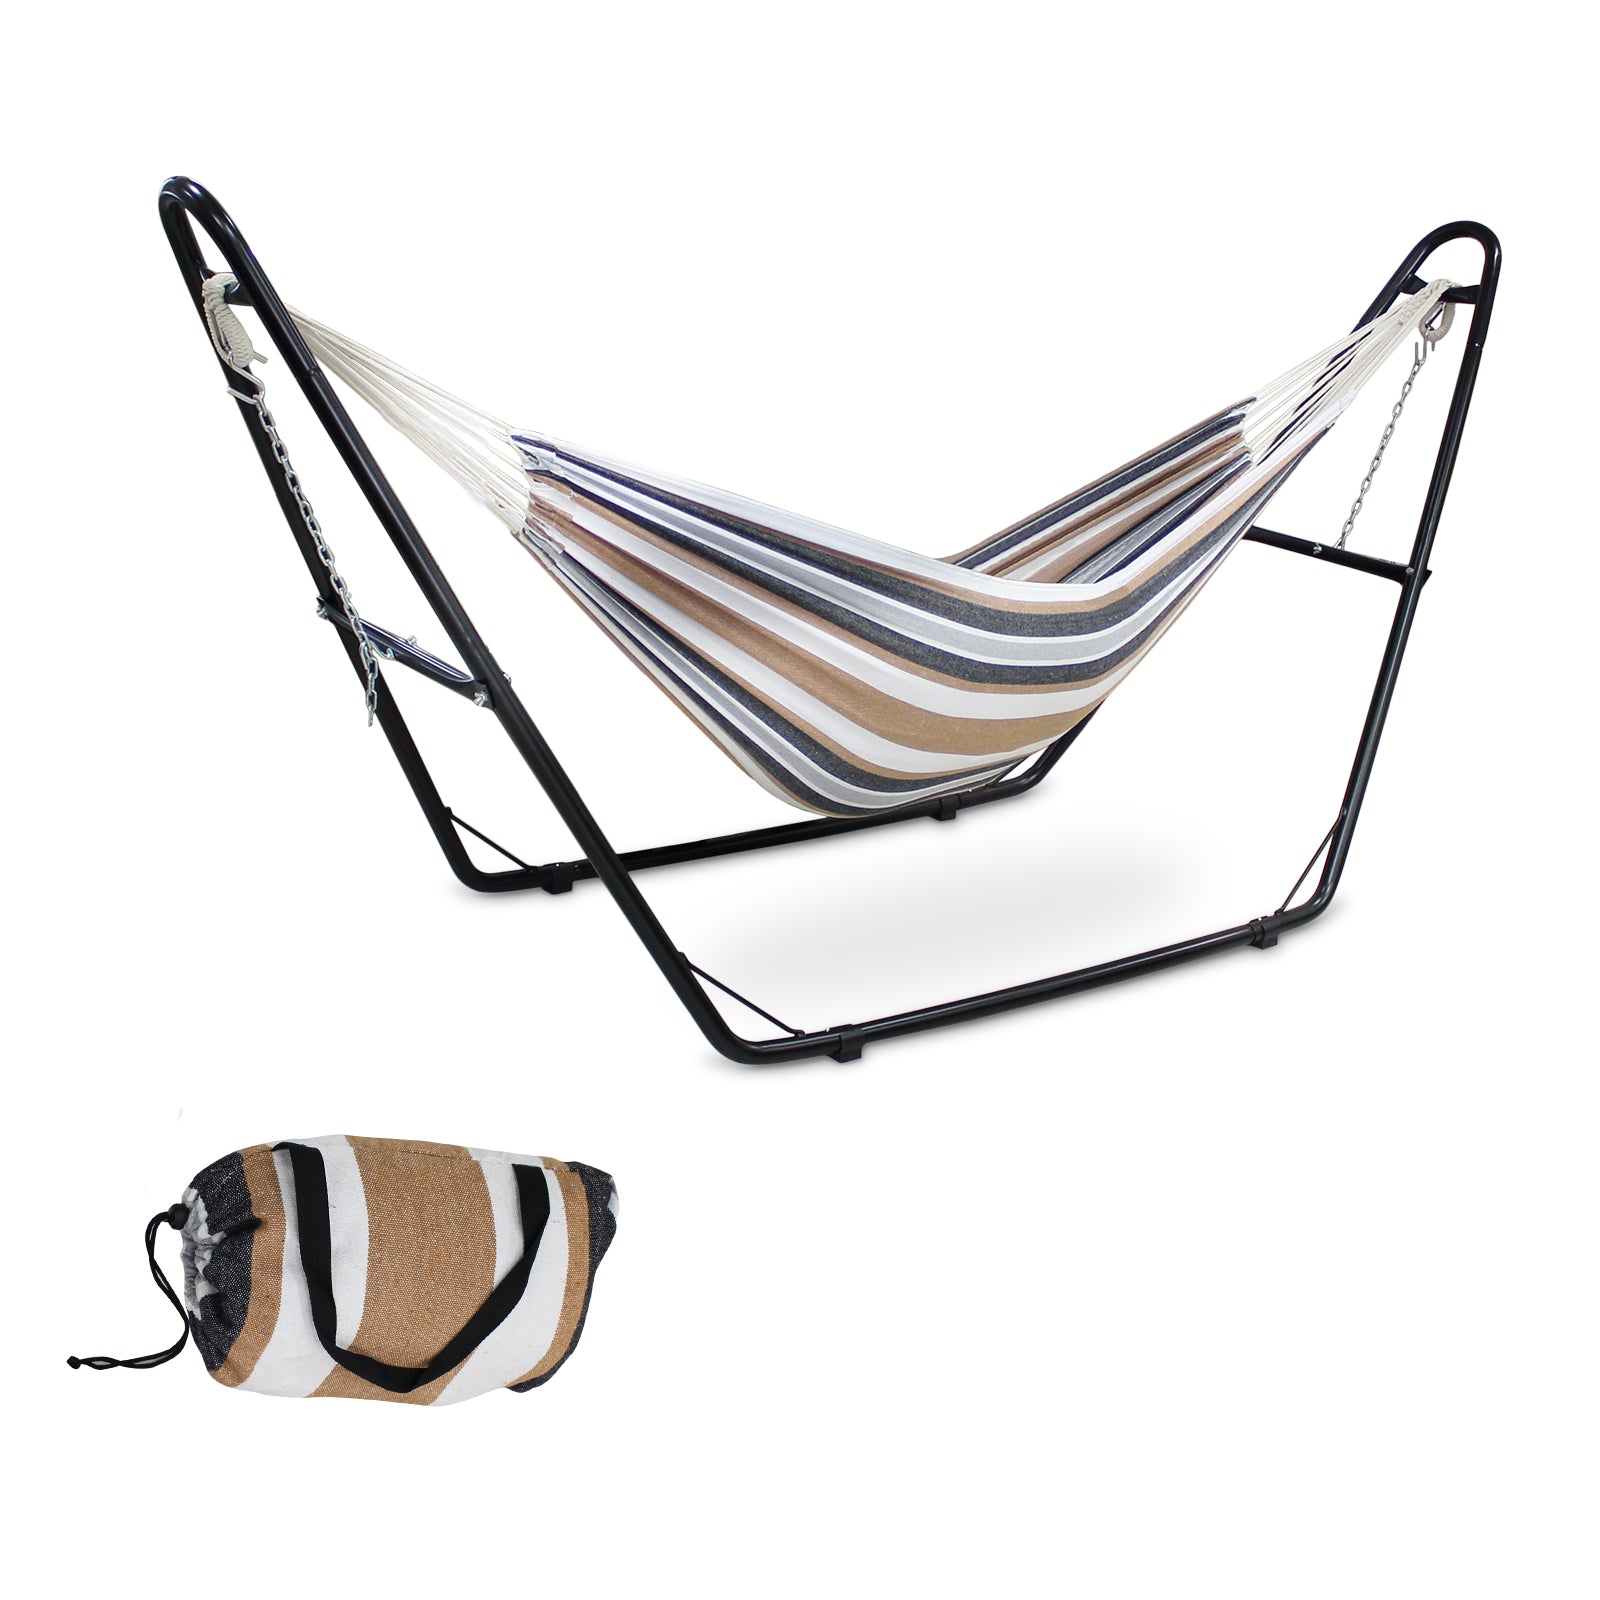 Standing-Hammock-Brown-2-Seater-Hammock-with-Stand-Adjustable-Height-Metal-Hammock-Support-Carrying-Bag-for-Indoor-Outdoor-Garden-Patio-Camping-Beach-Maximum-Load-200kg